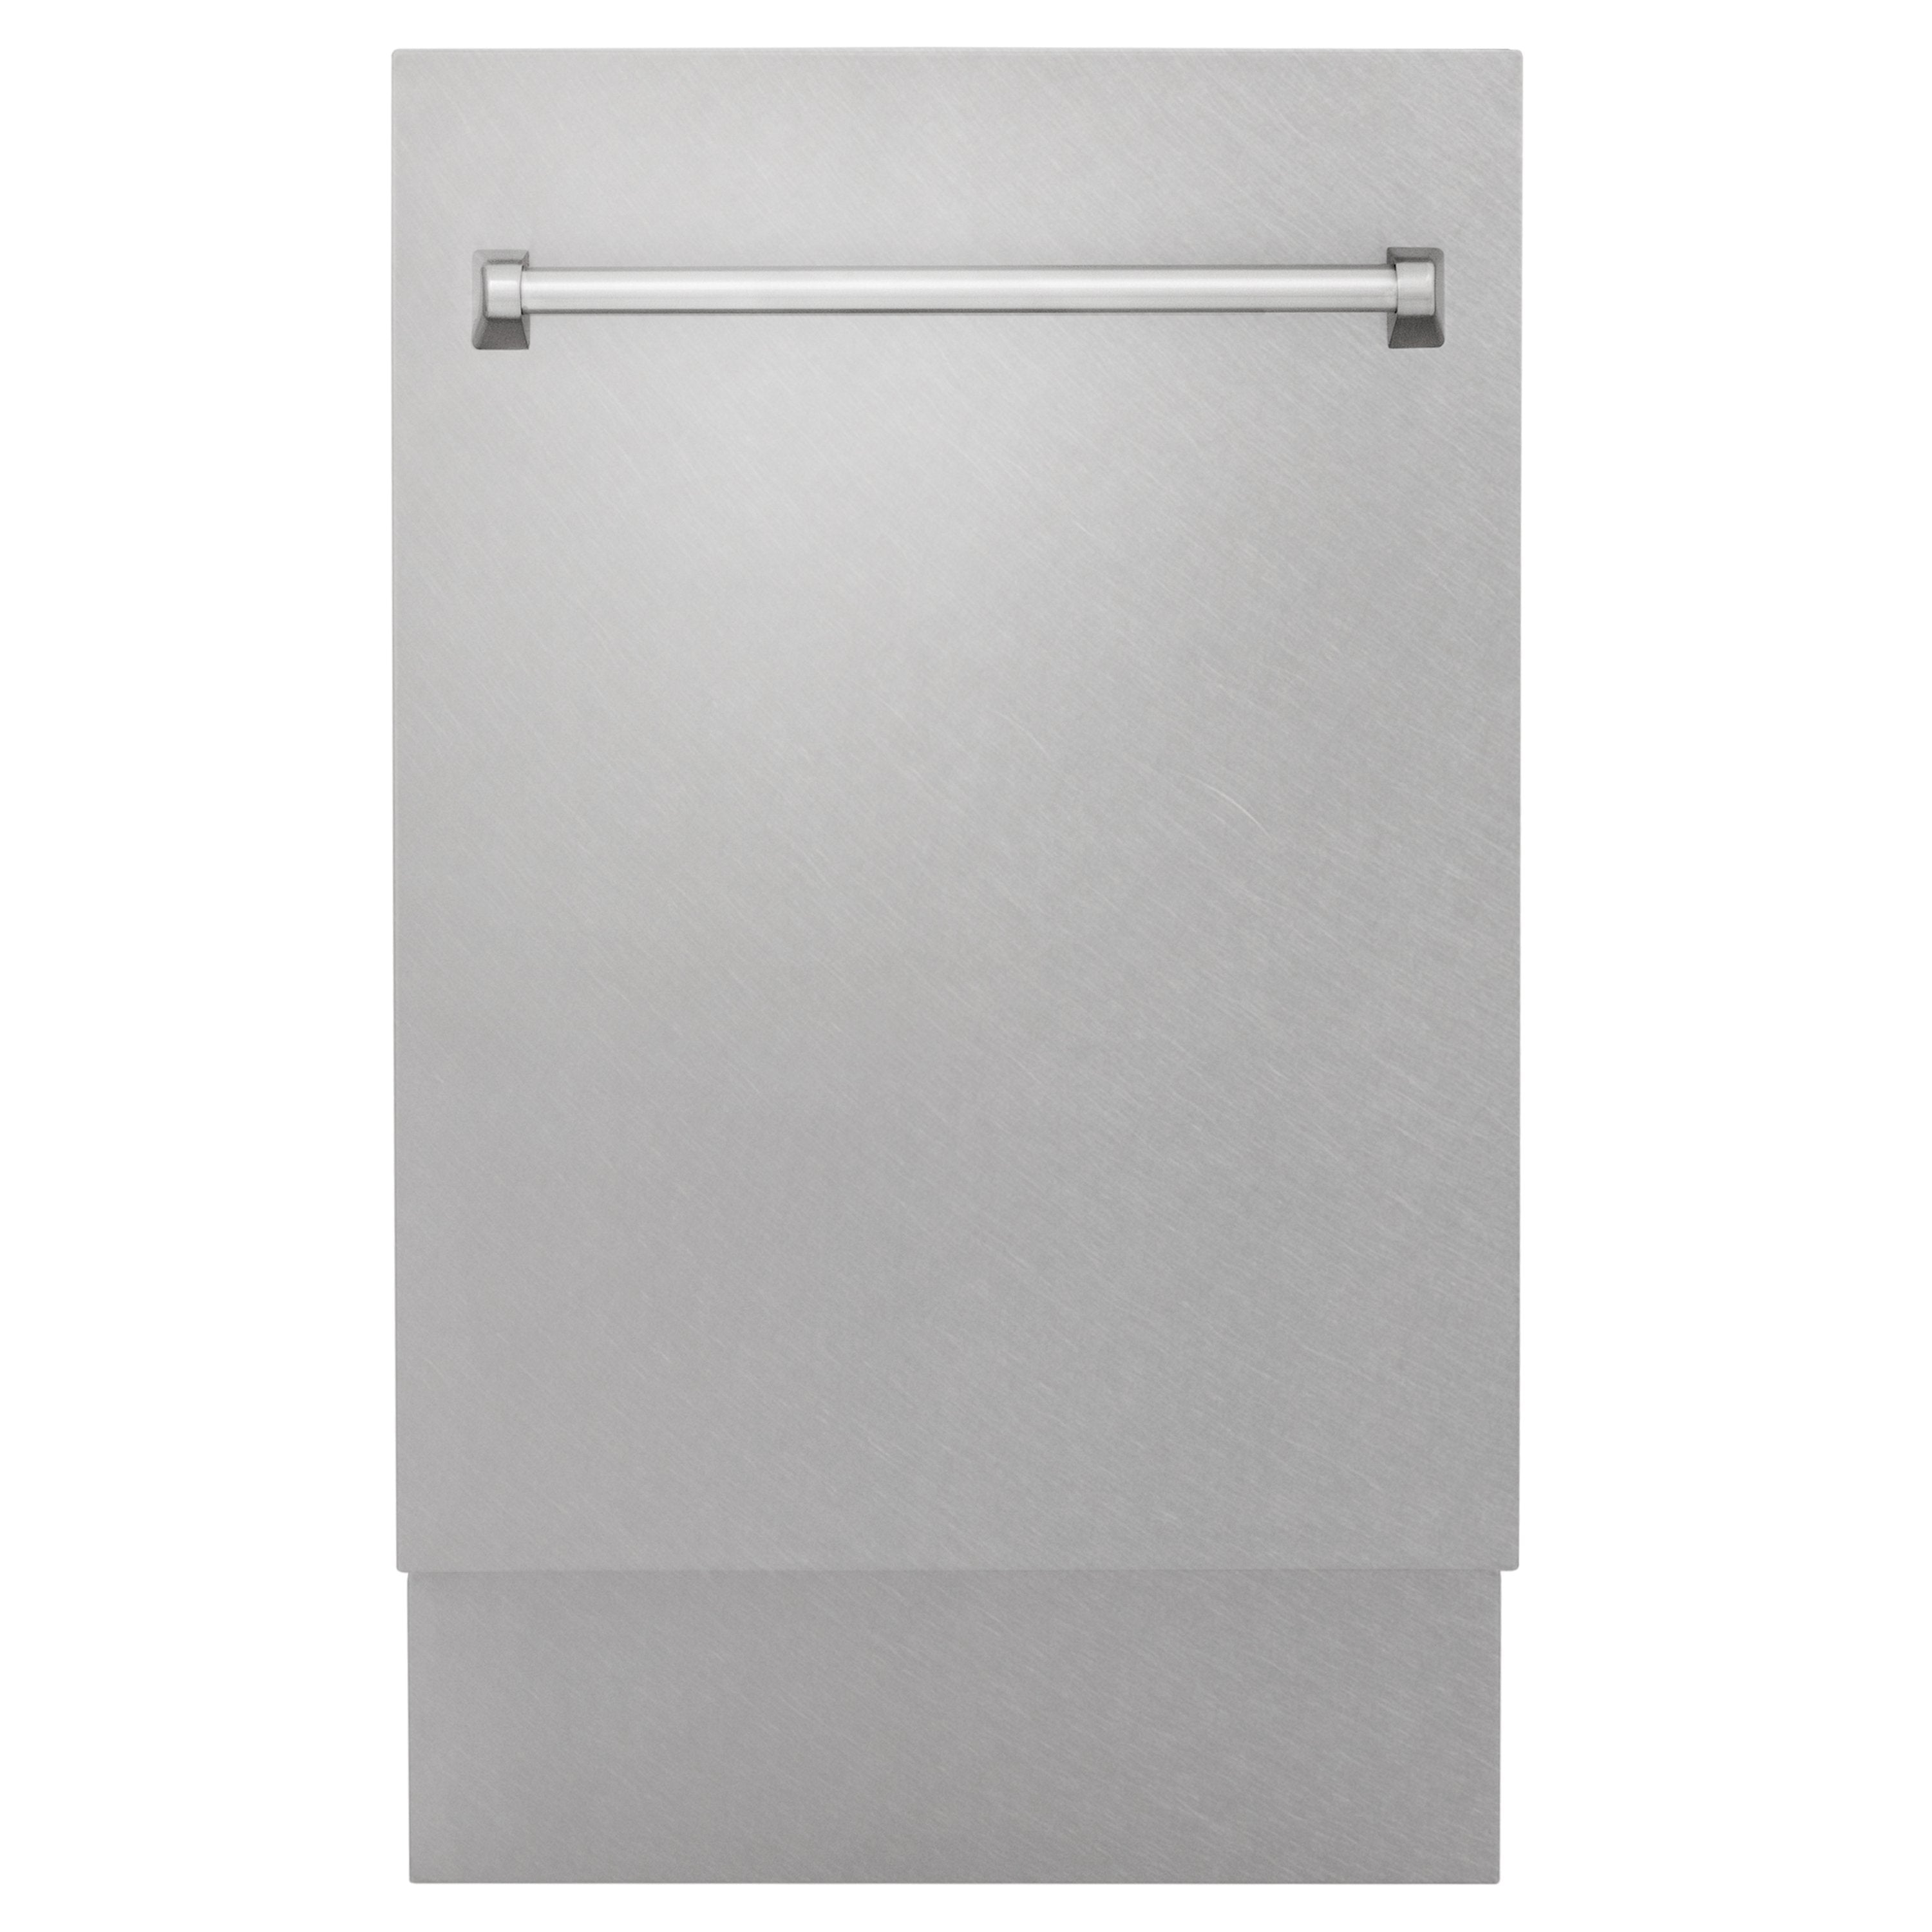 ZLINE 18" Tallac Series 3rd Rack Top Control Dishwasher in Stainless Steel and Traditional Handle, 51dBa (DWV-18)